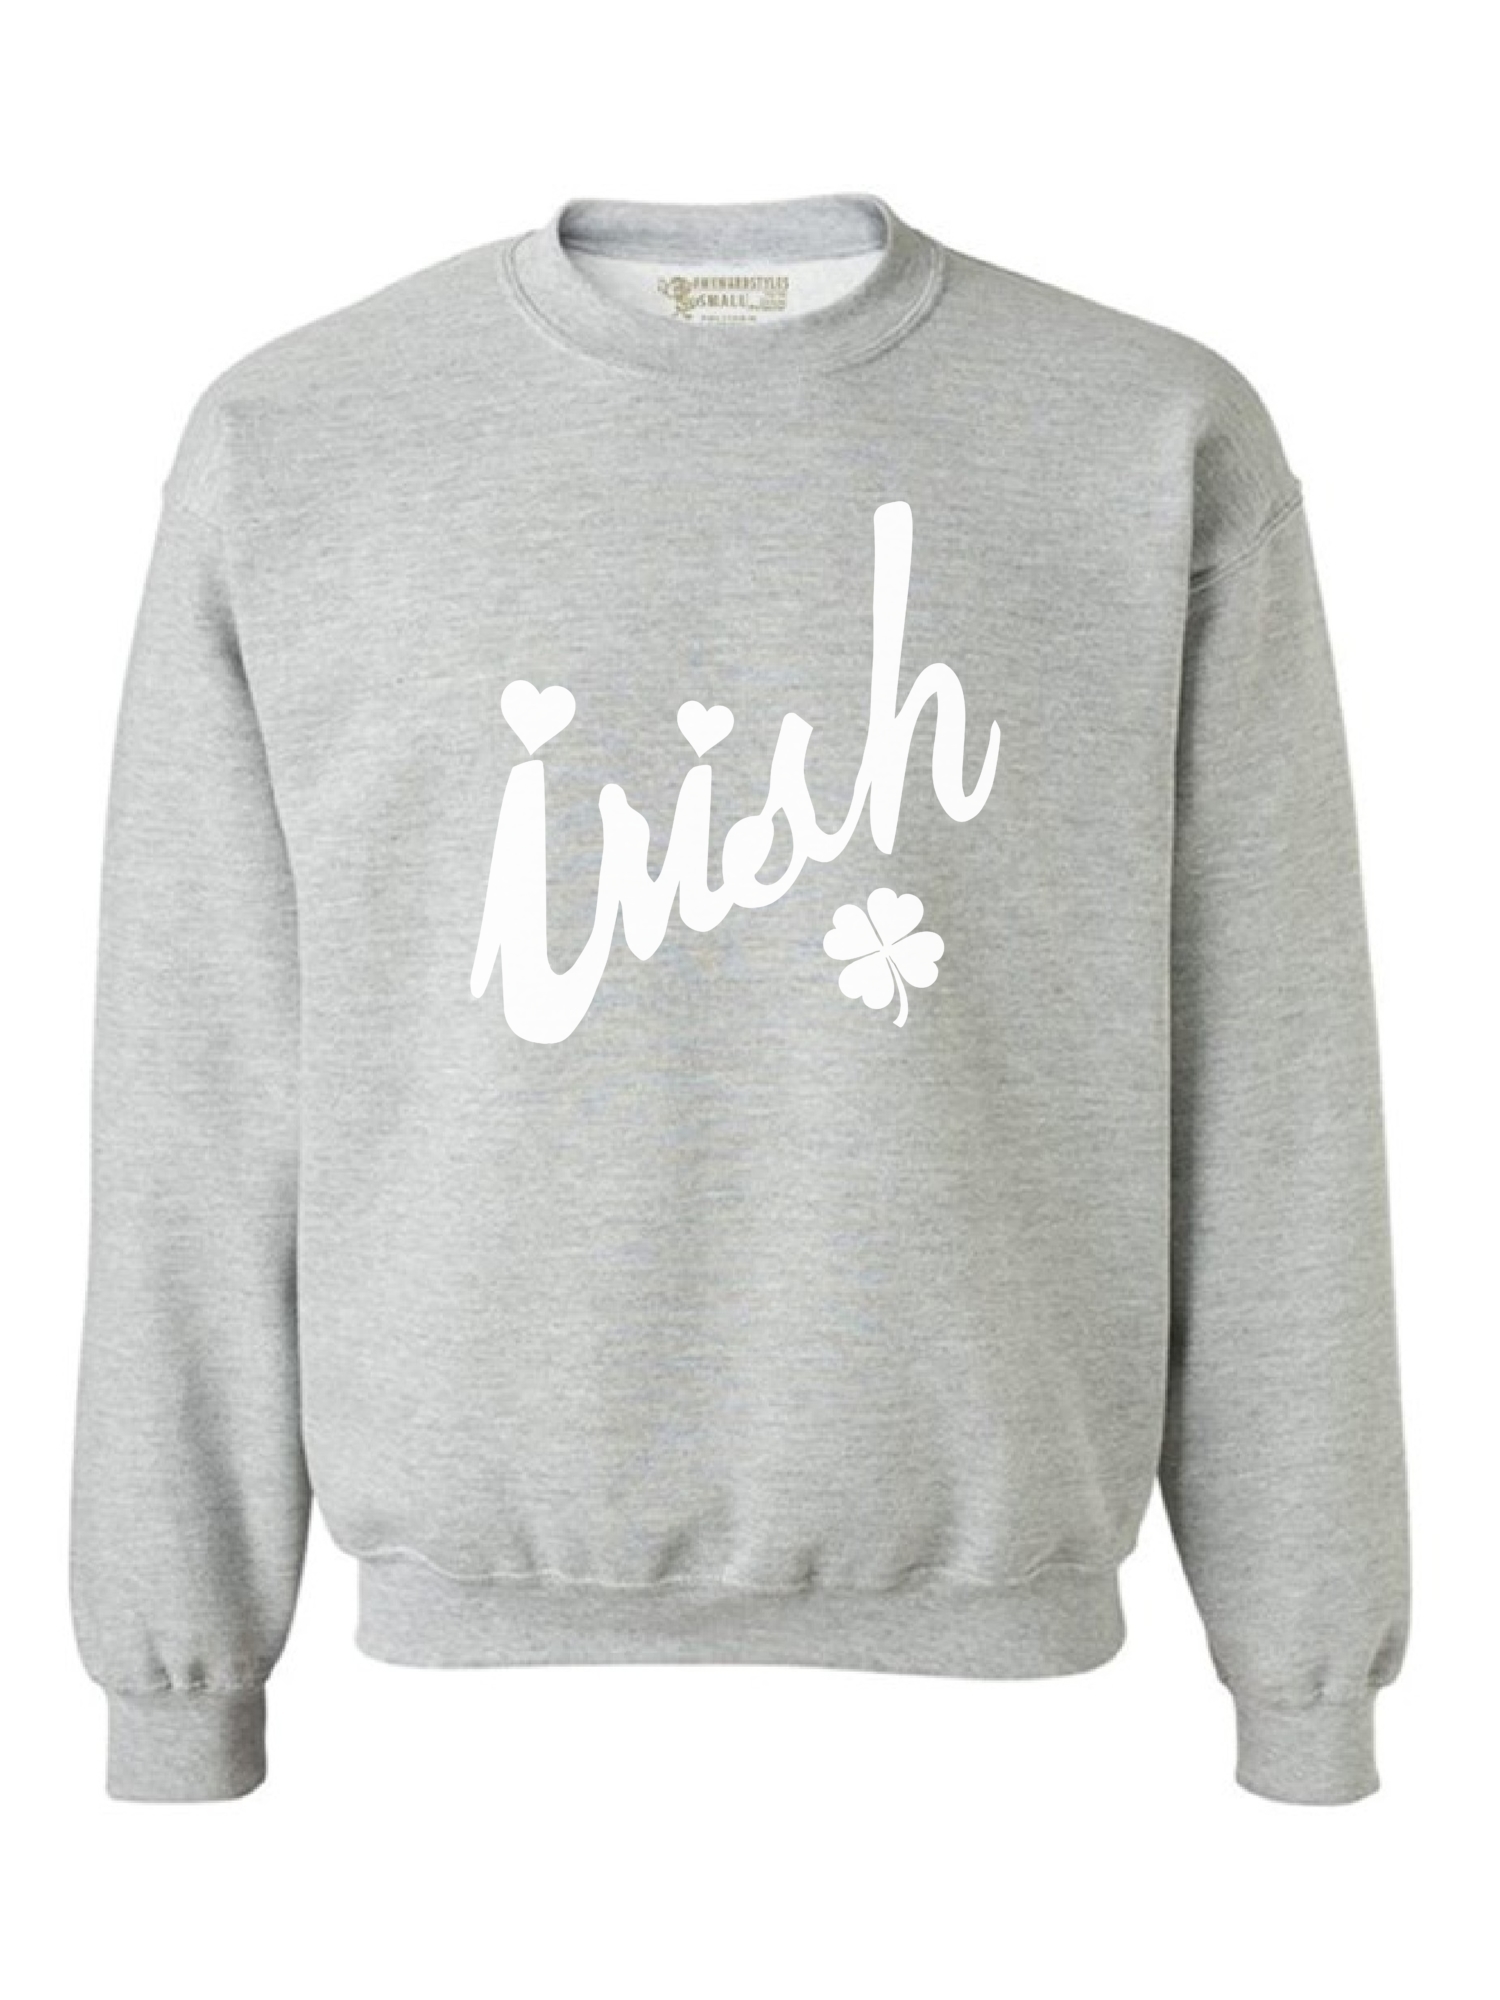 Awkward Styles Irish Sweatshirt St. Patrick's Day Gifts Four Leaf Clover Sweater Lucky Sweatshirt Irish Gifts for Men Lucky Clover Sweater for Women St. Patricks Sweater Irish Clover Sweatshirt - image 1 of 5